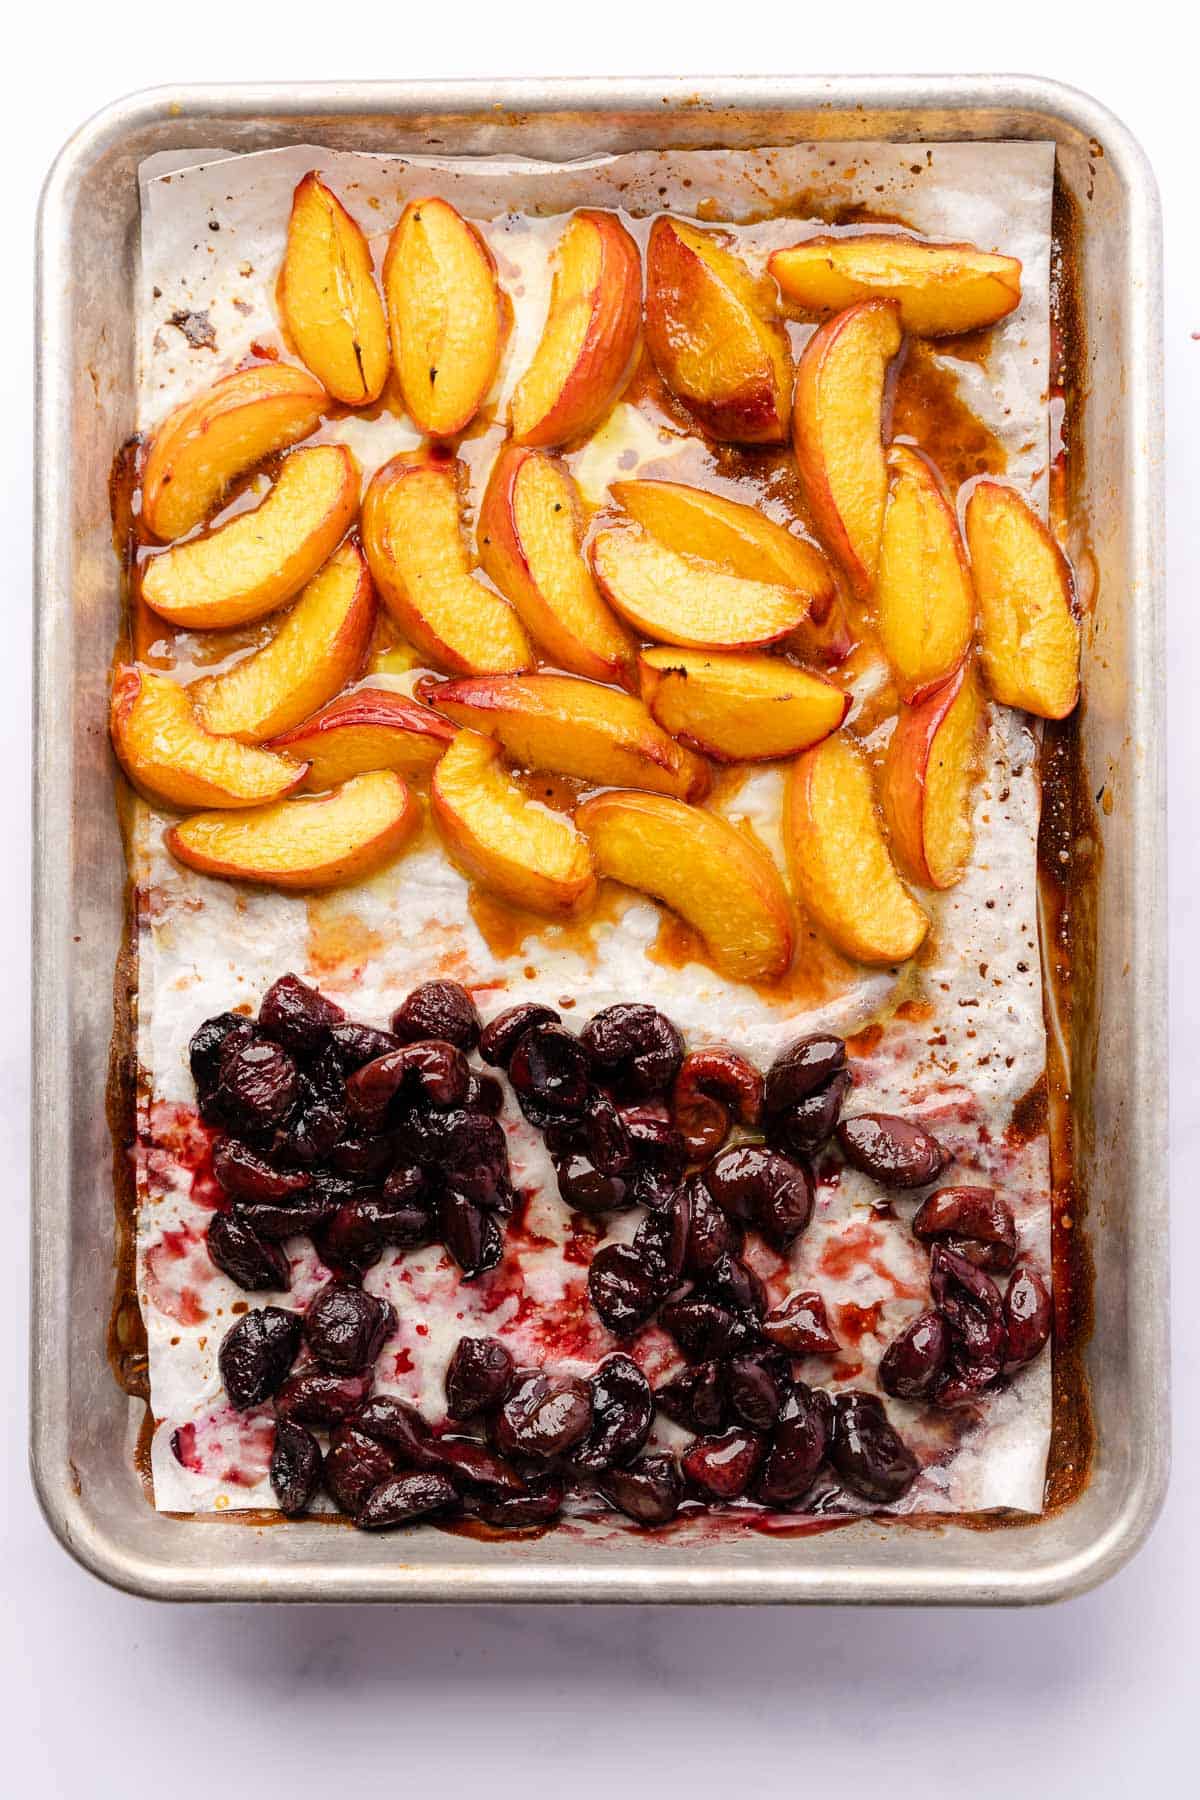 baked nectarines and cherries on a parchment lined baking sheet